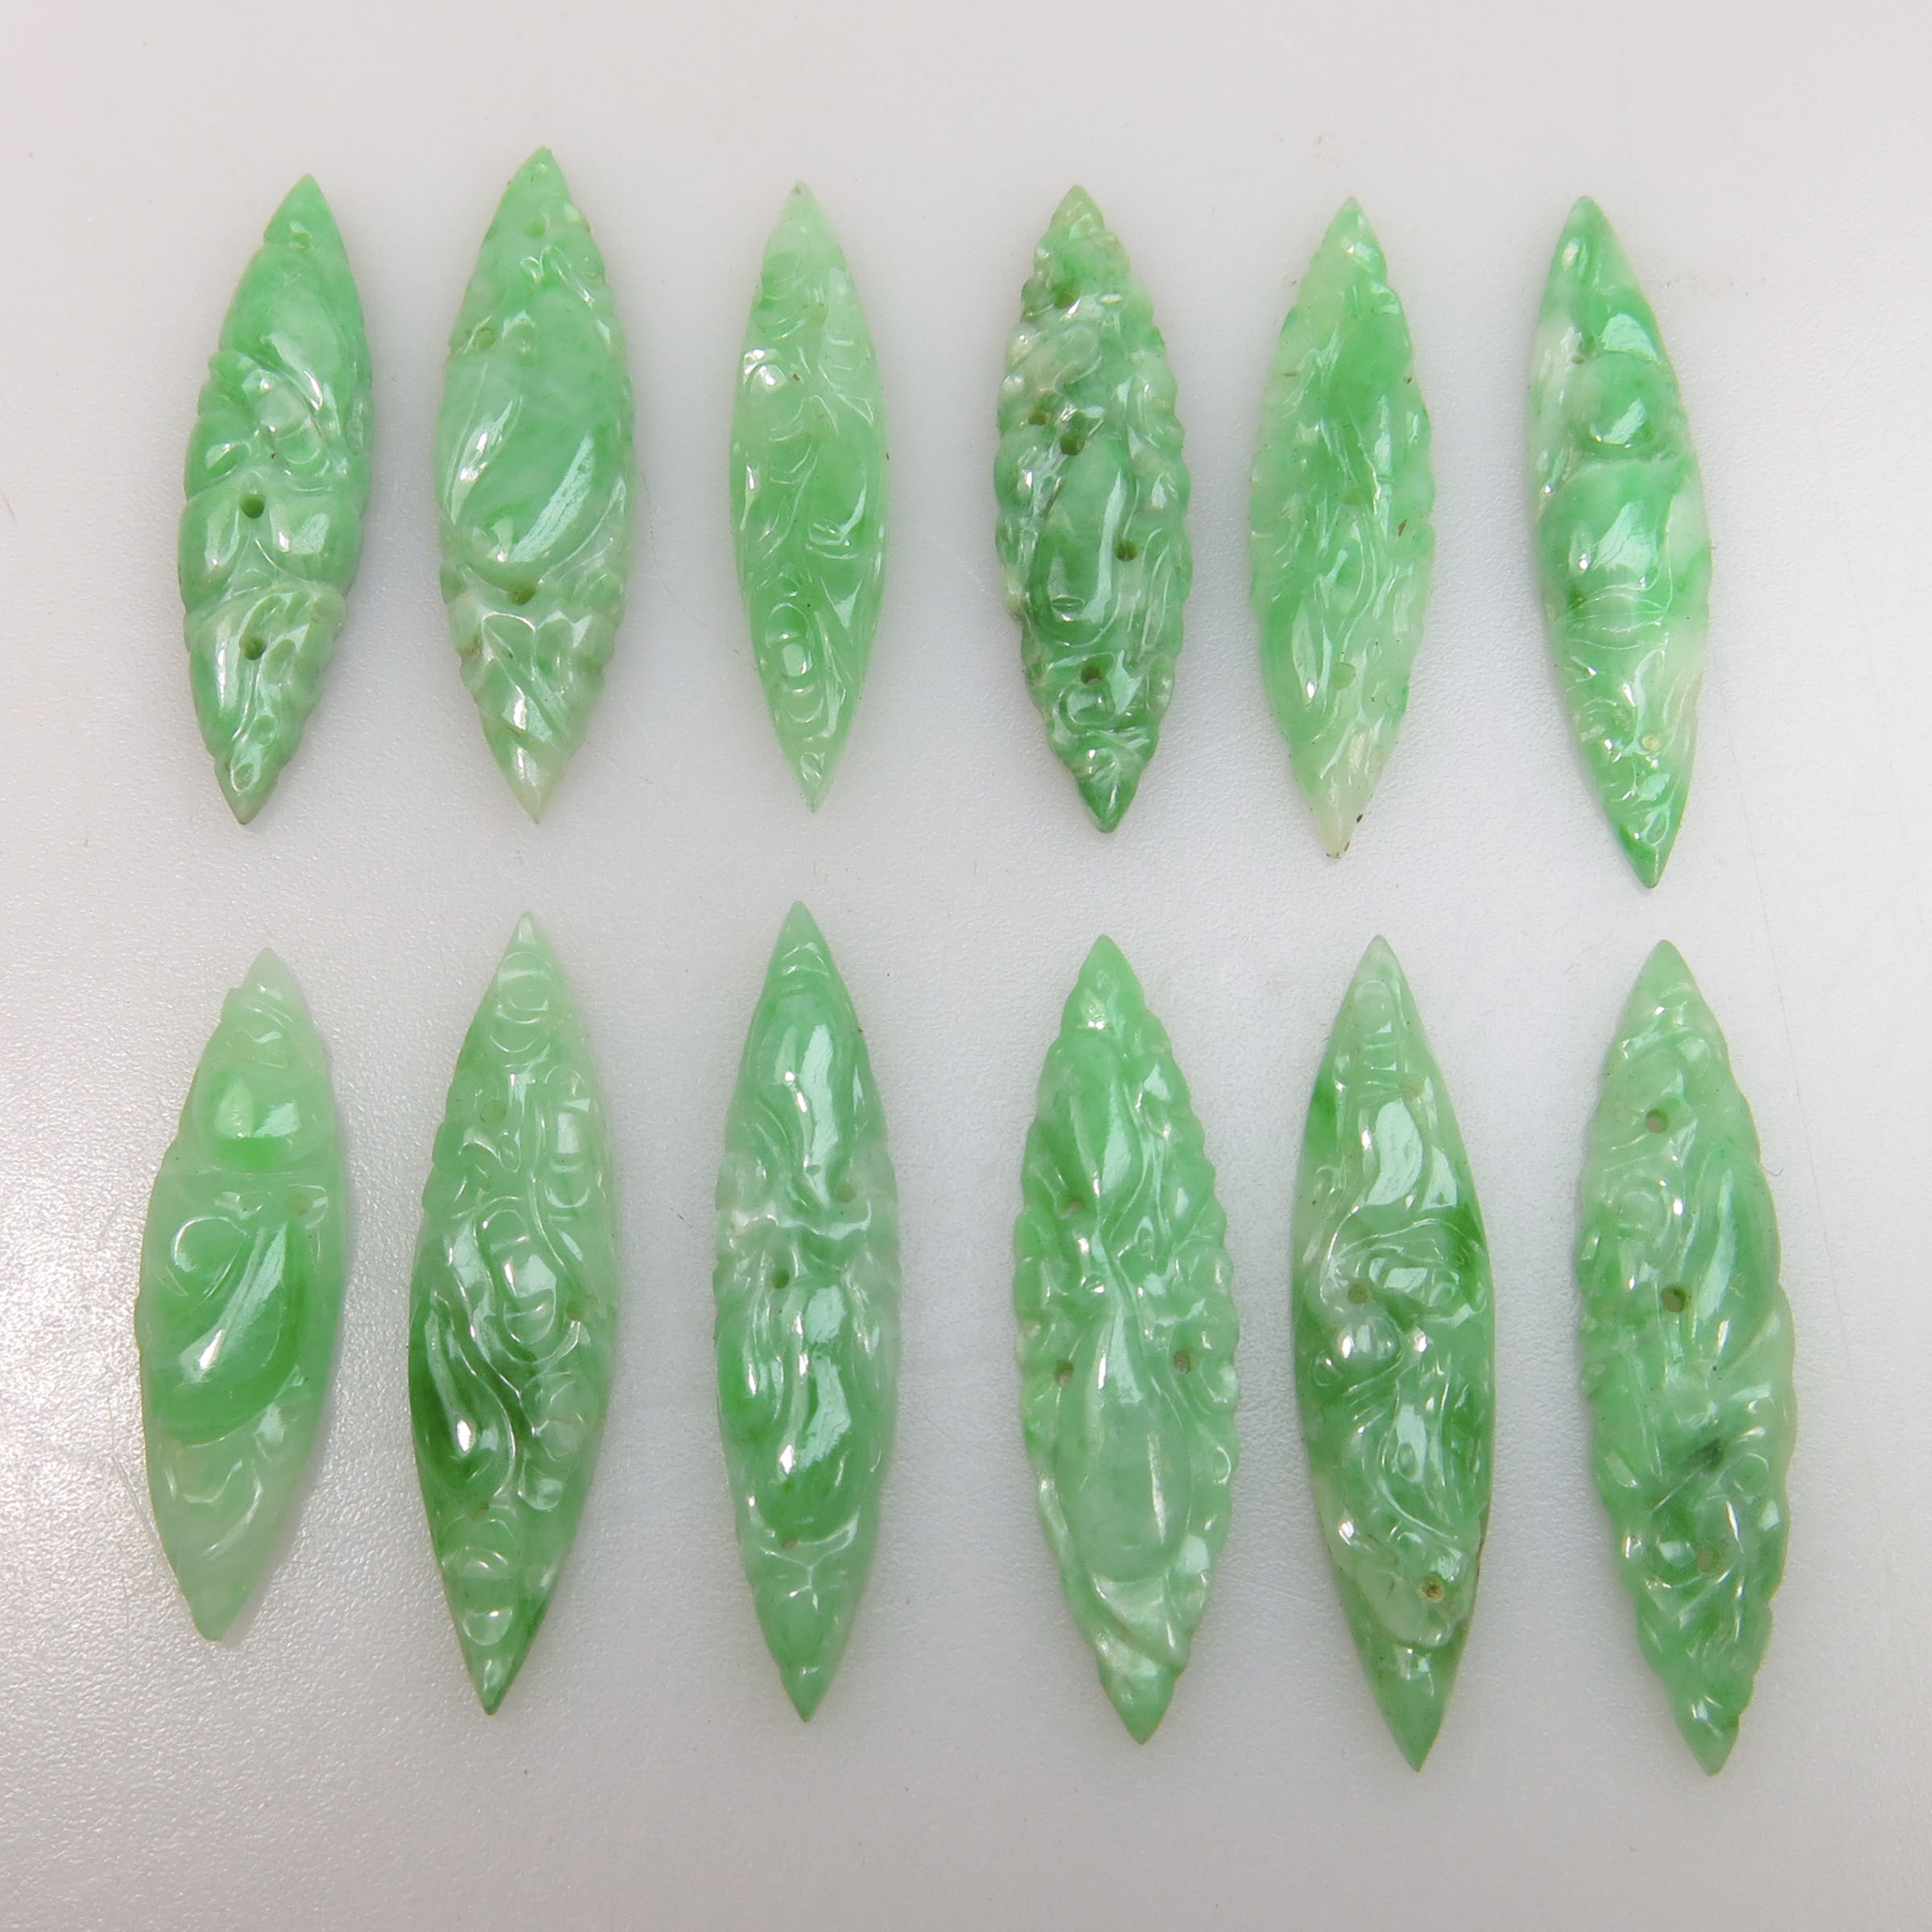 12 Carved And Pierced Navette Shaped Jadeite Panels